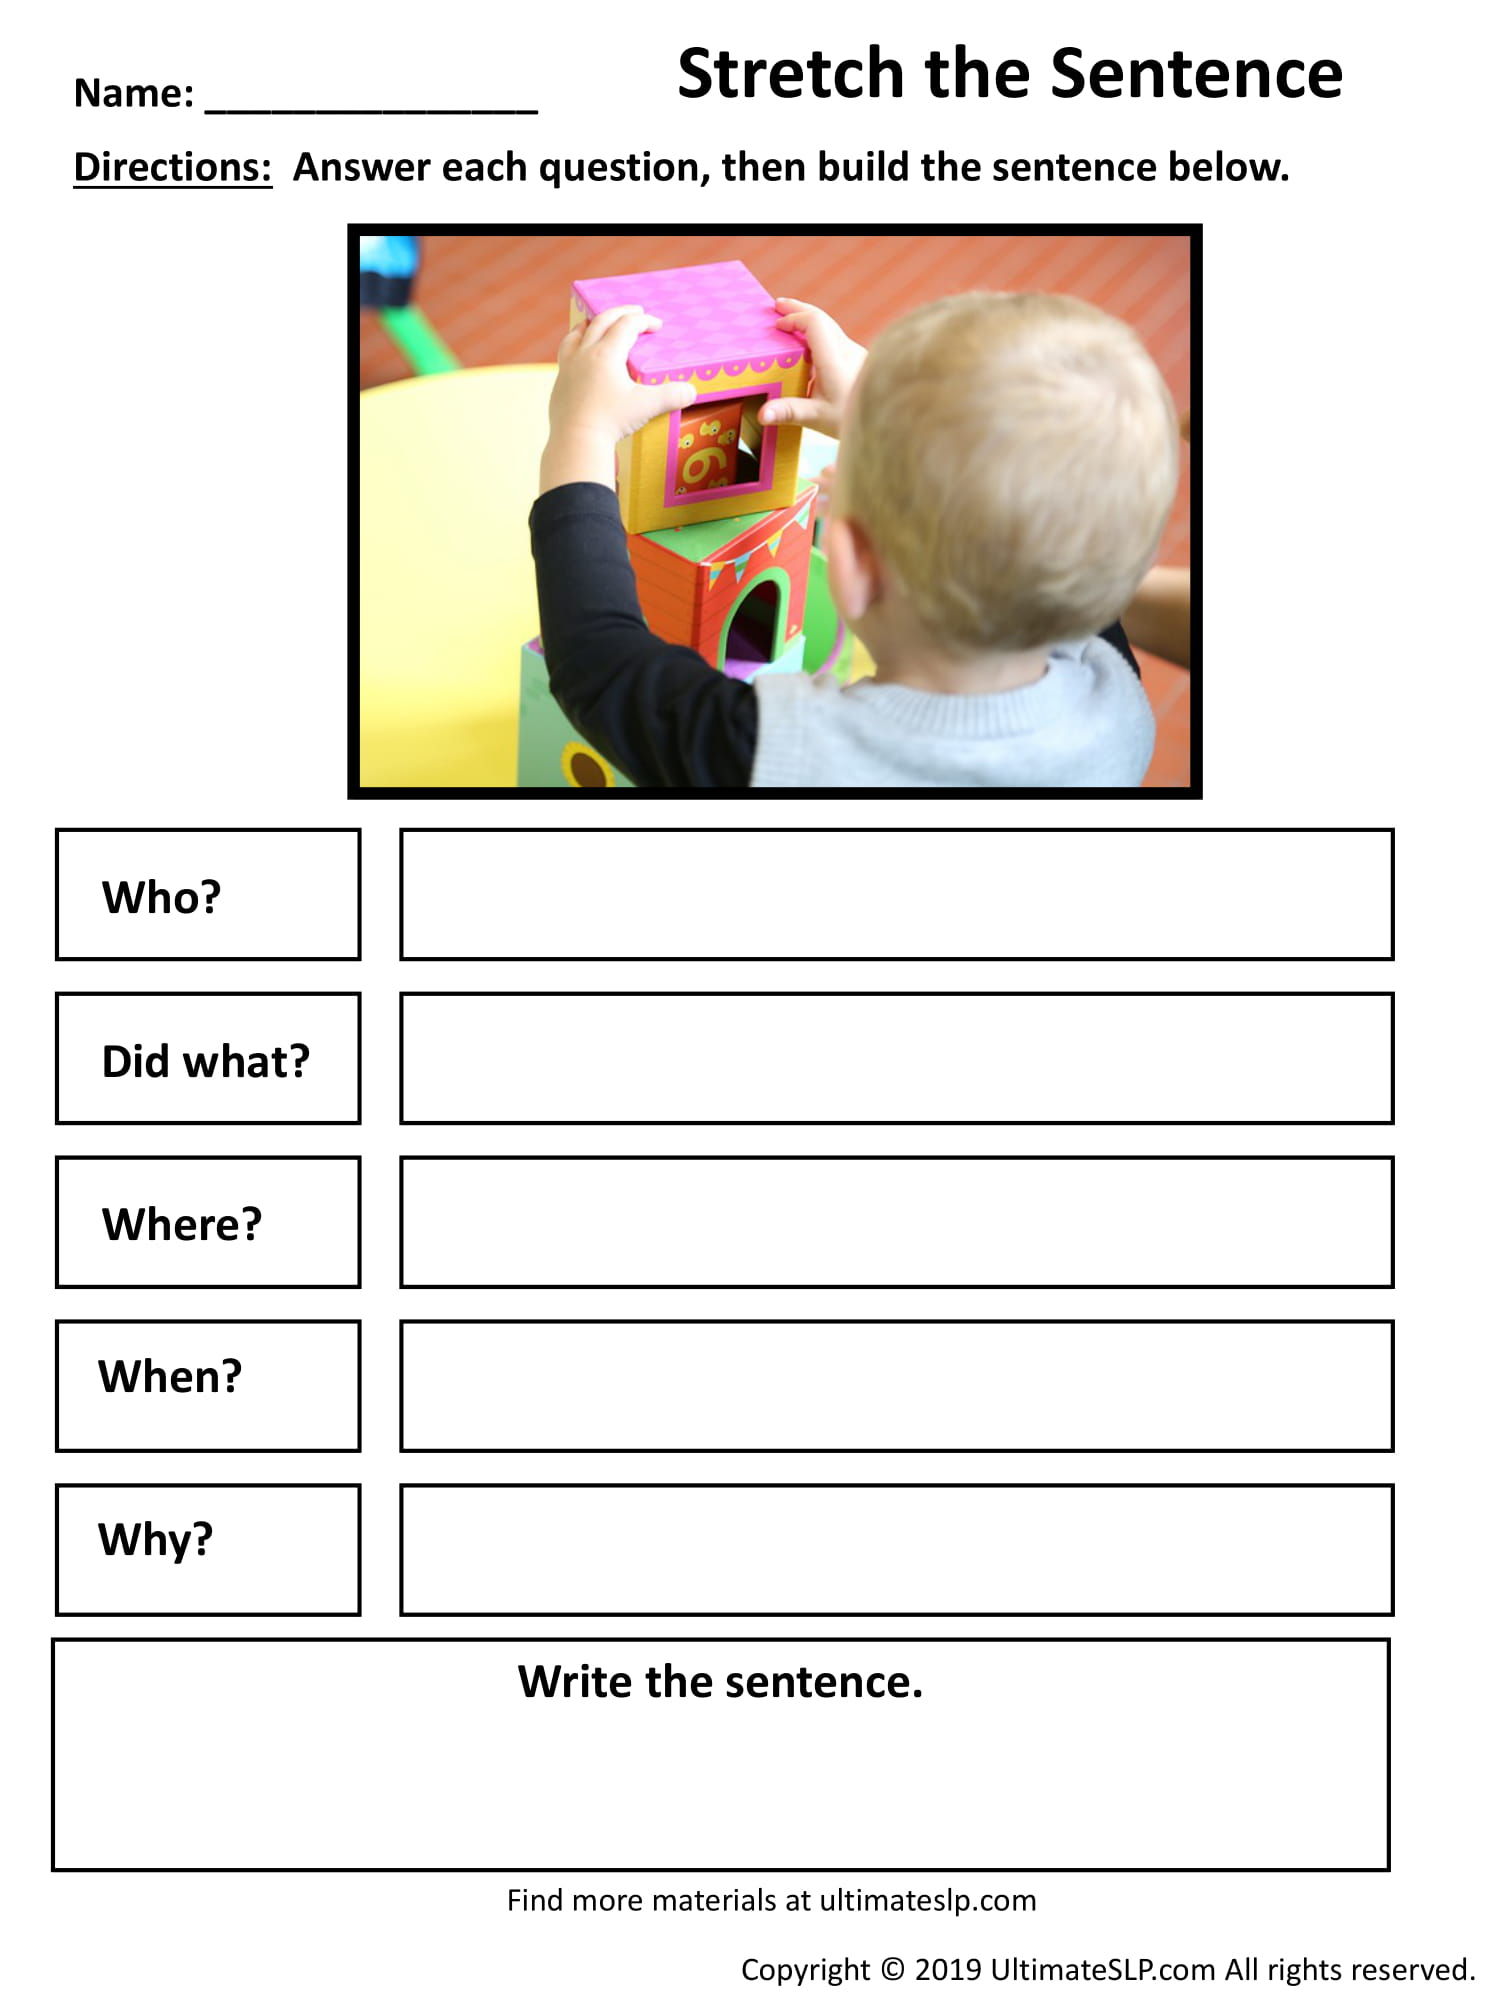 free-stretch-a-sentence-poster-graphic-organizers-and-next-comes-l-hyperlexia-resources